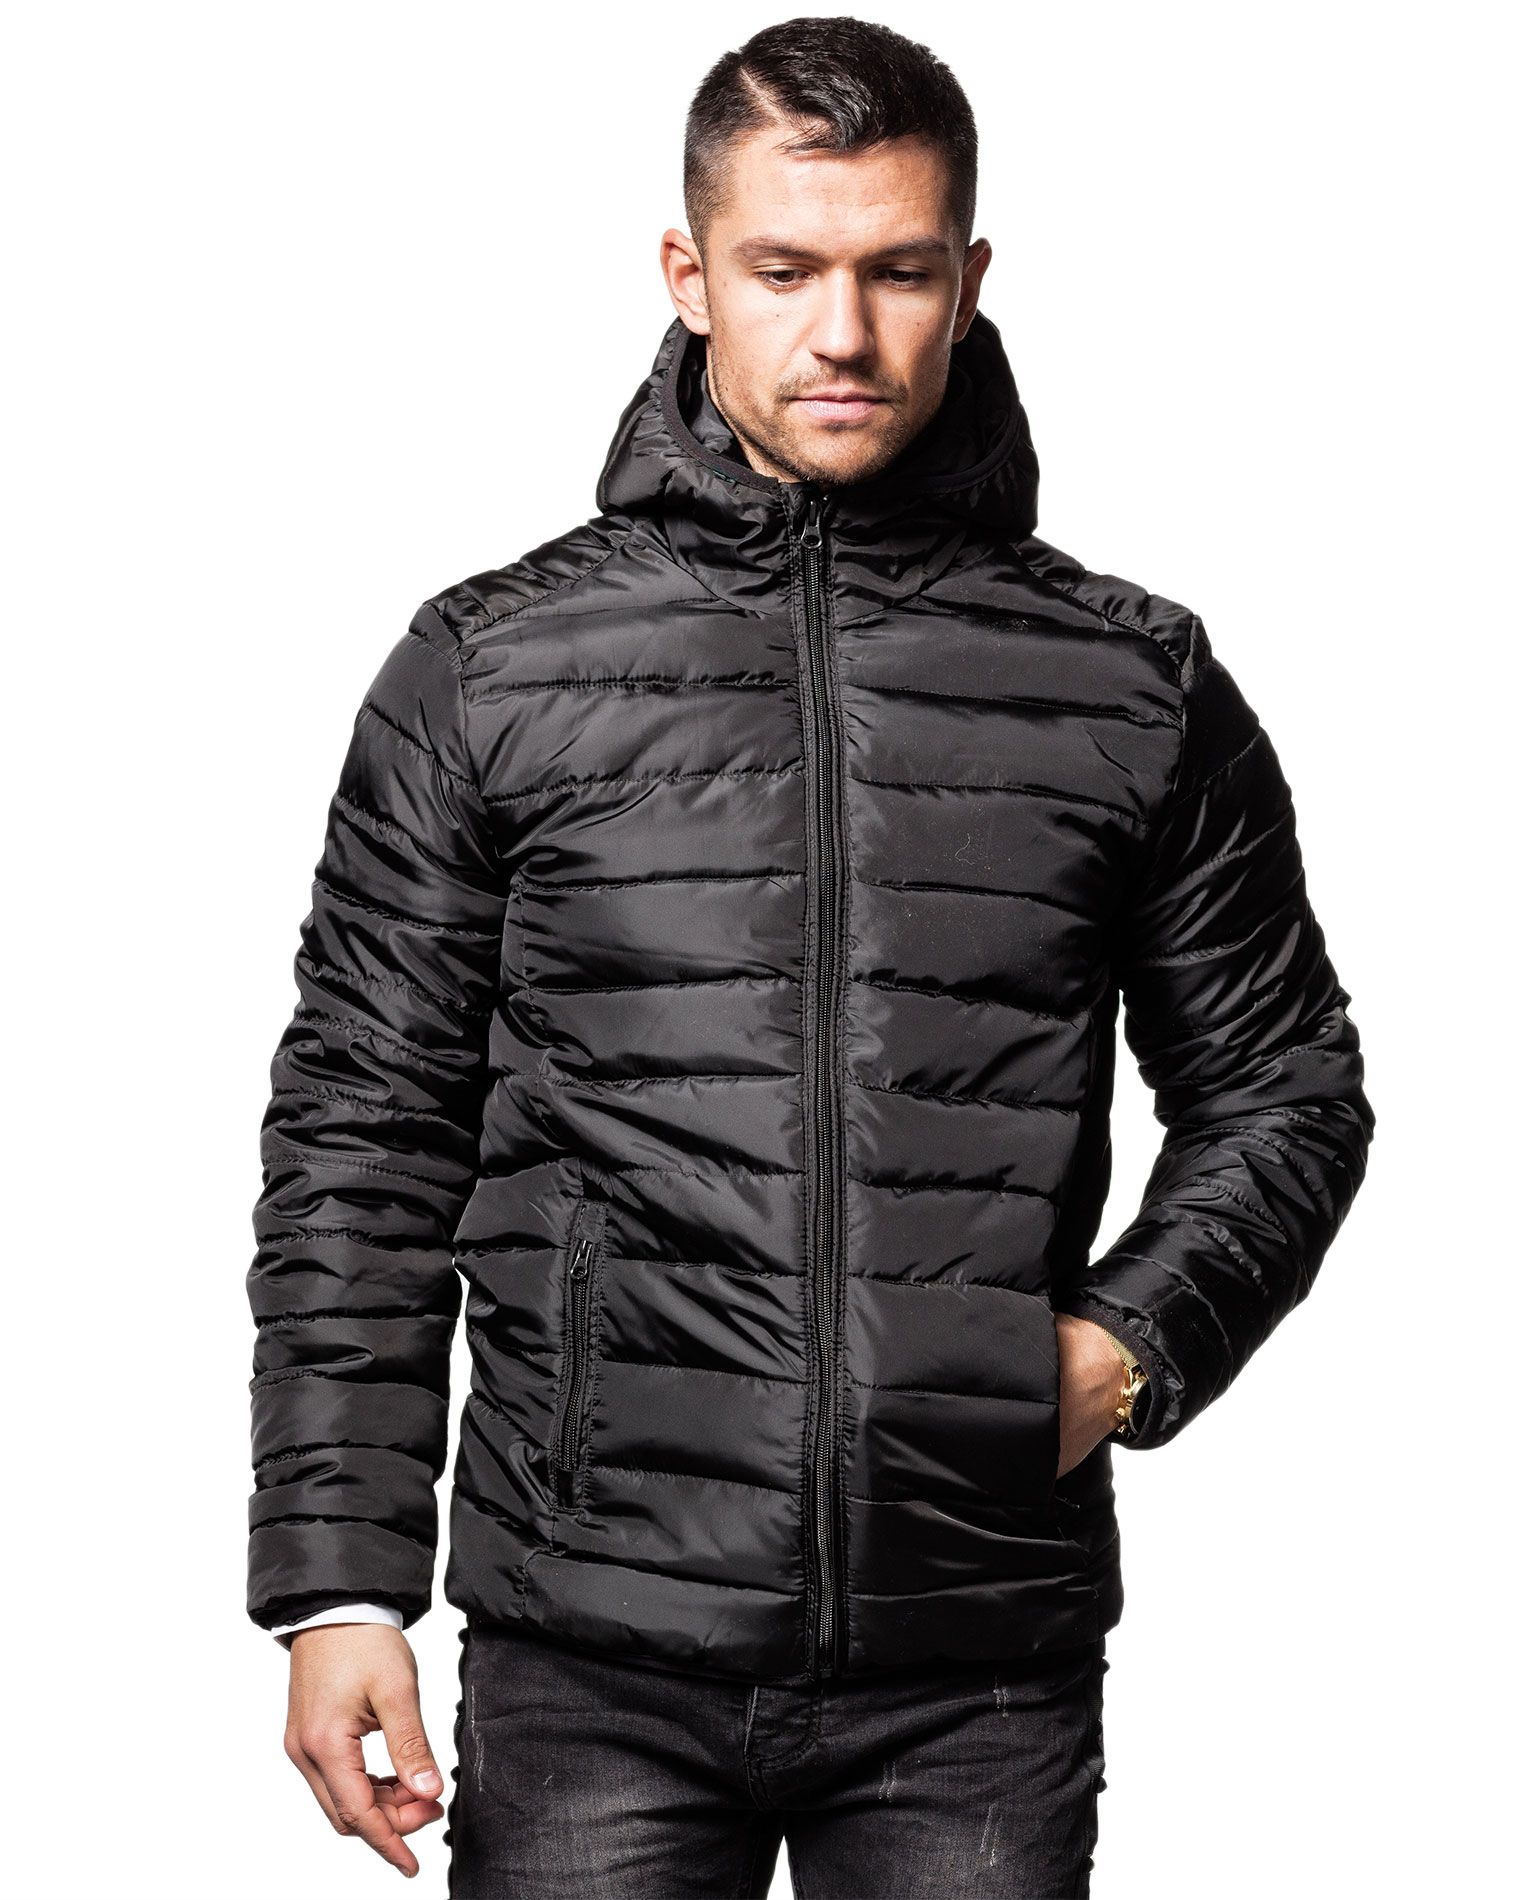 Liner Puff Jacket Hood Black Only & Sons - 1819 - Lightweight Jackets ...